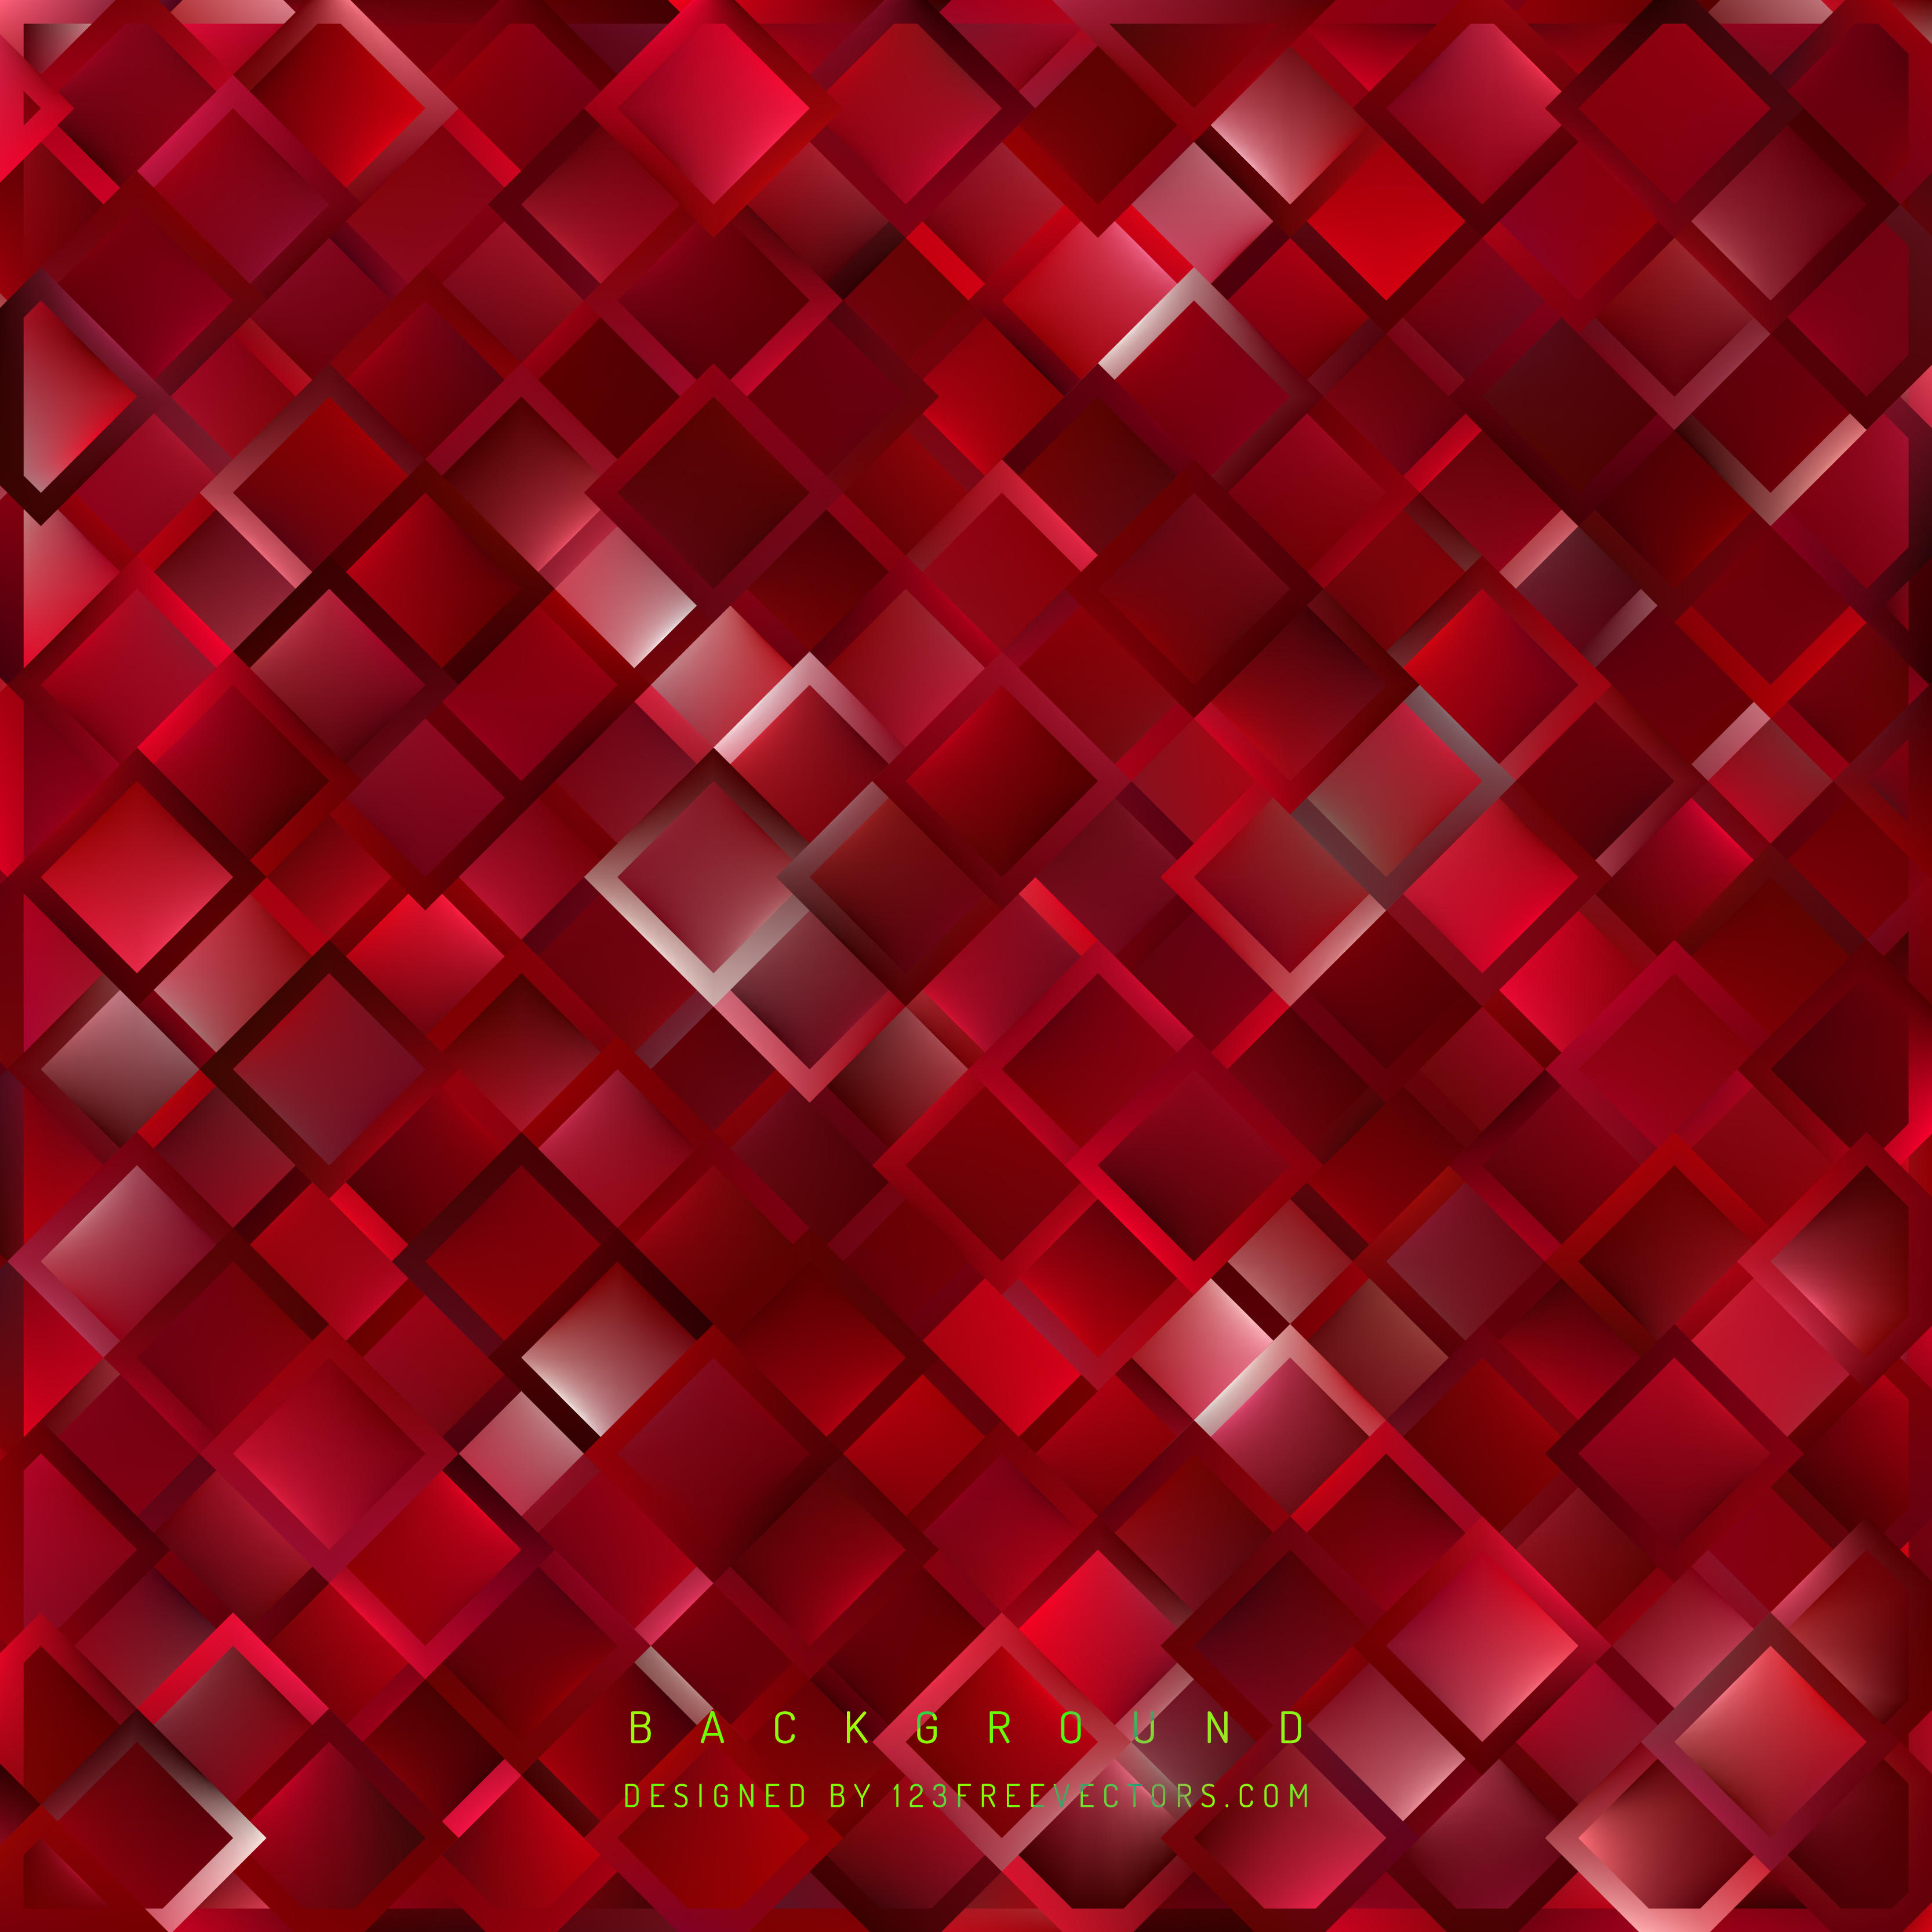 Dark Red Square Background Pattern | 123Freevectors